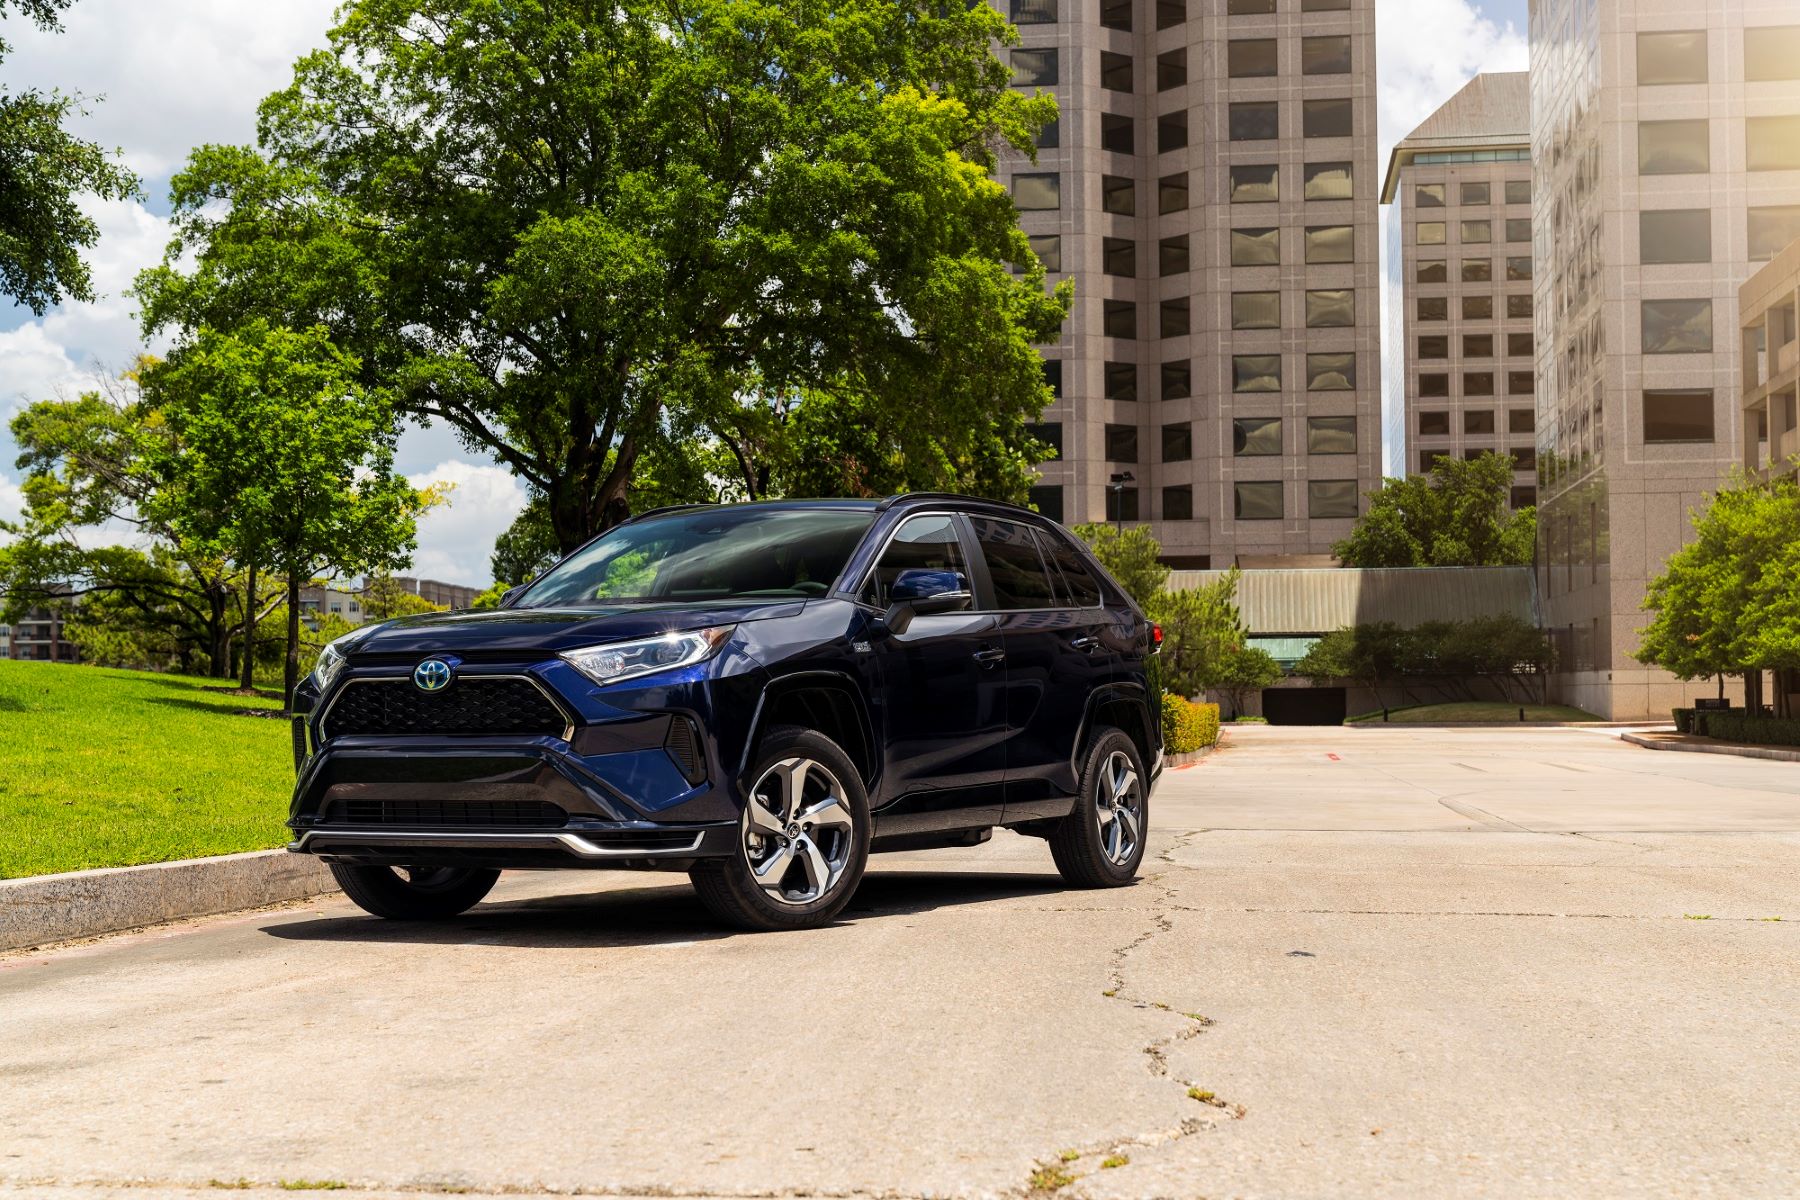 The 2021 Toyota RAV4 Prime plug-in hybrid (PHEV) compact SUV model parked near a grass field outside of windowed skyscrapers